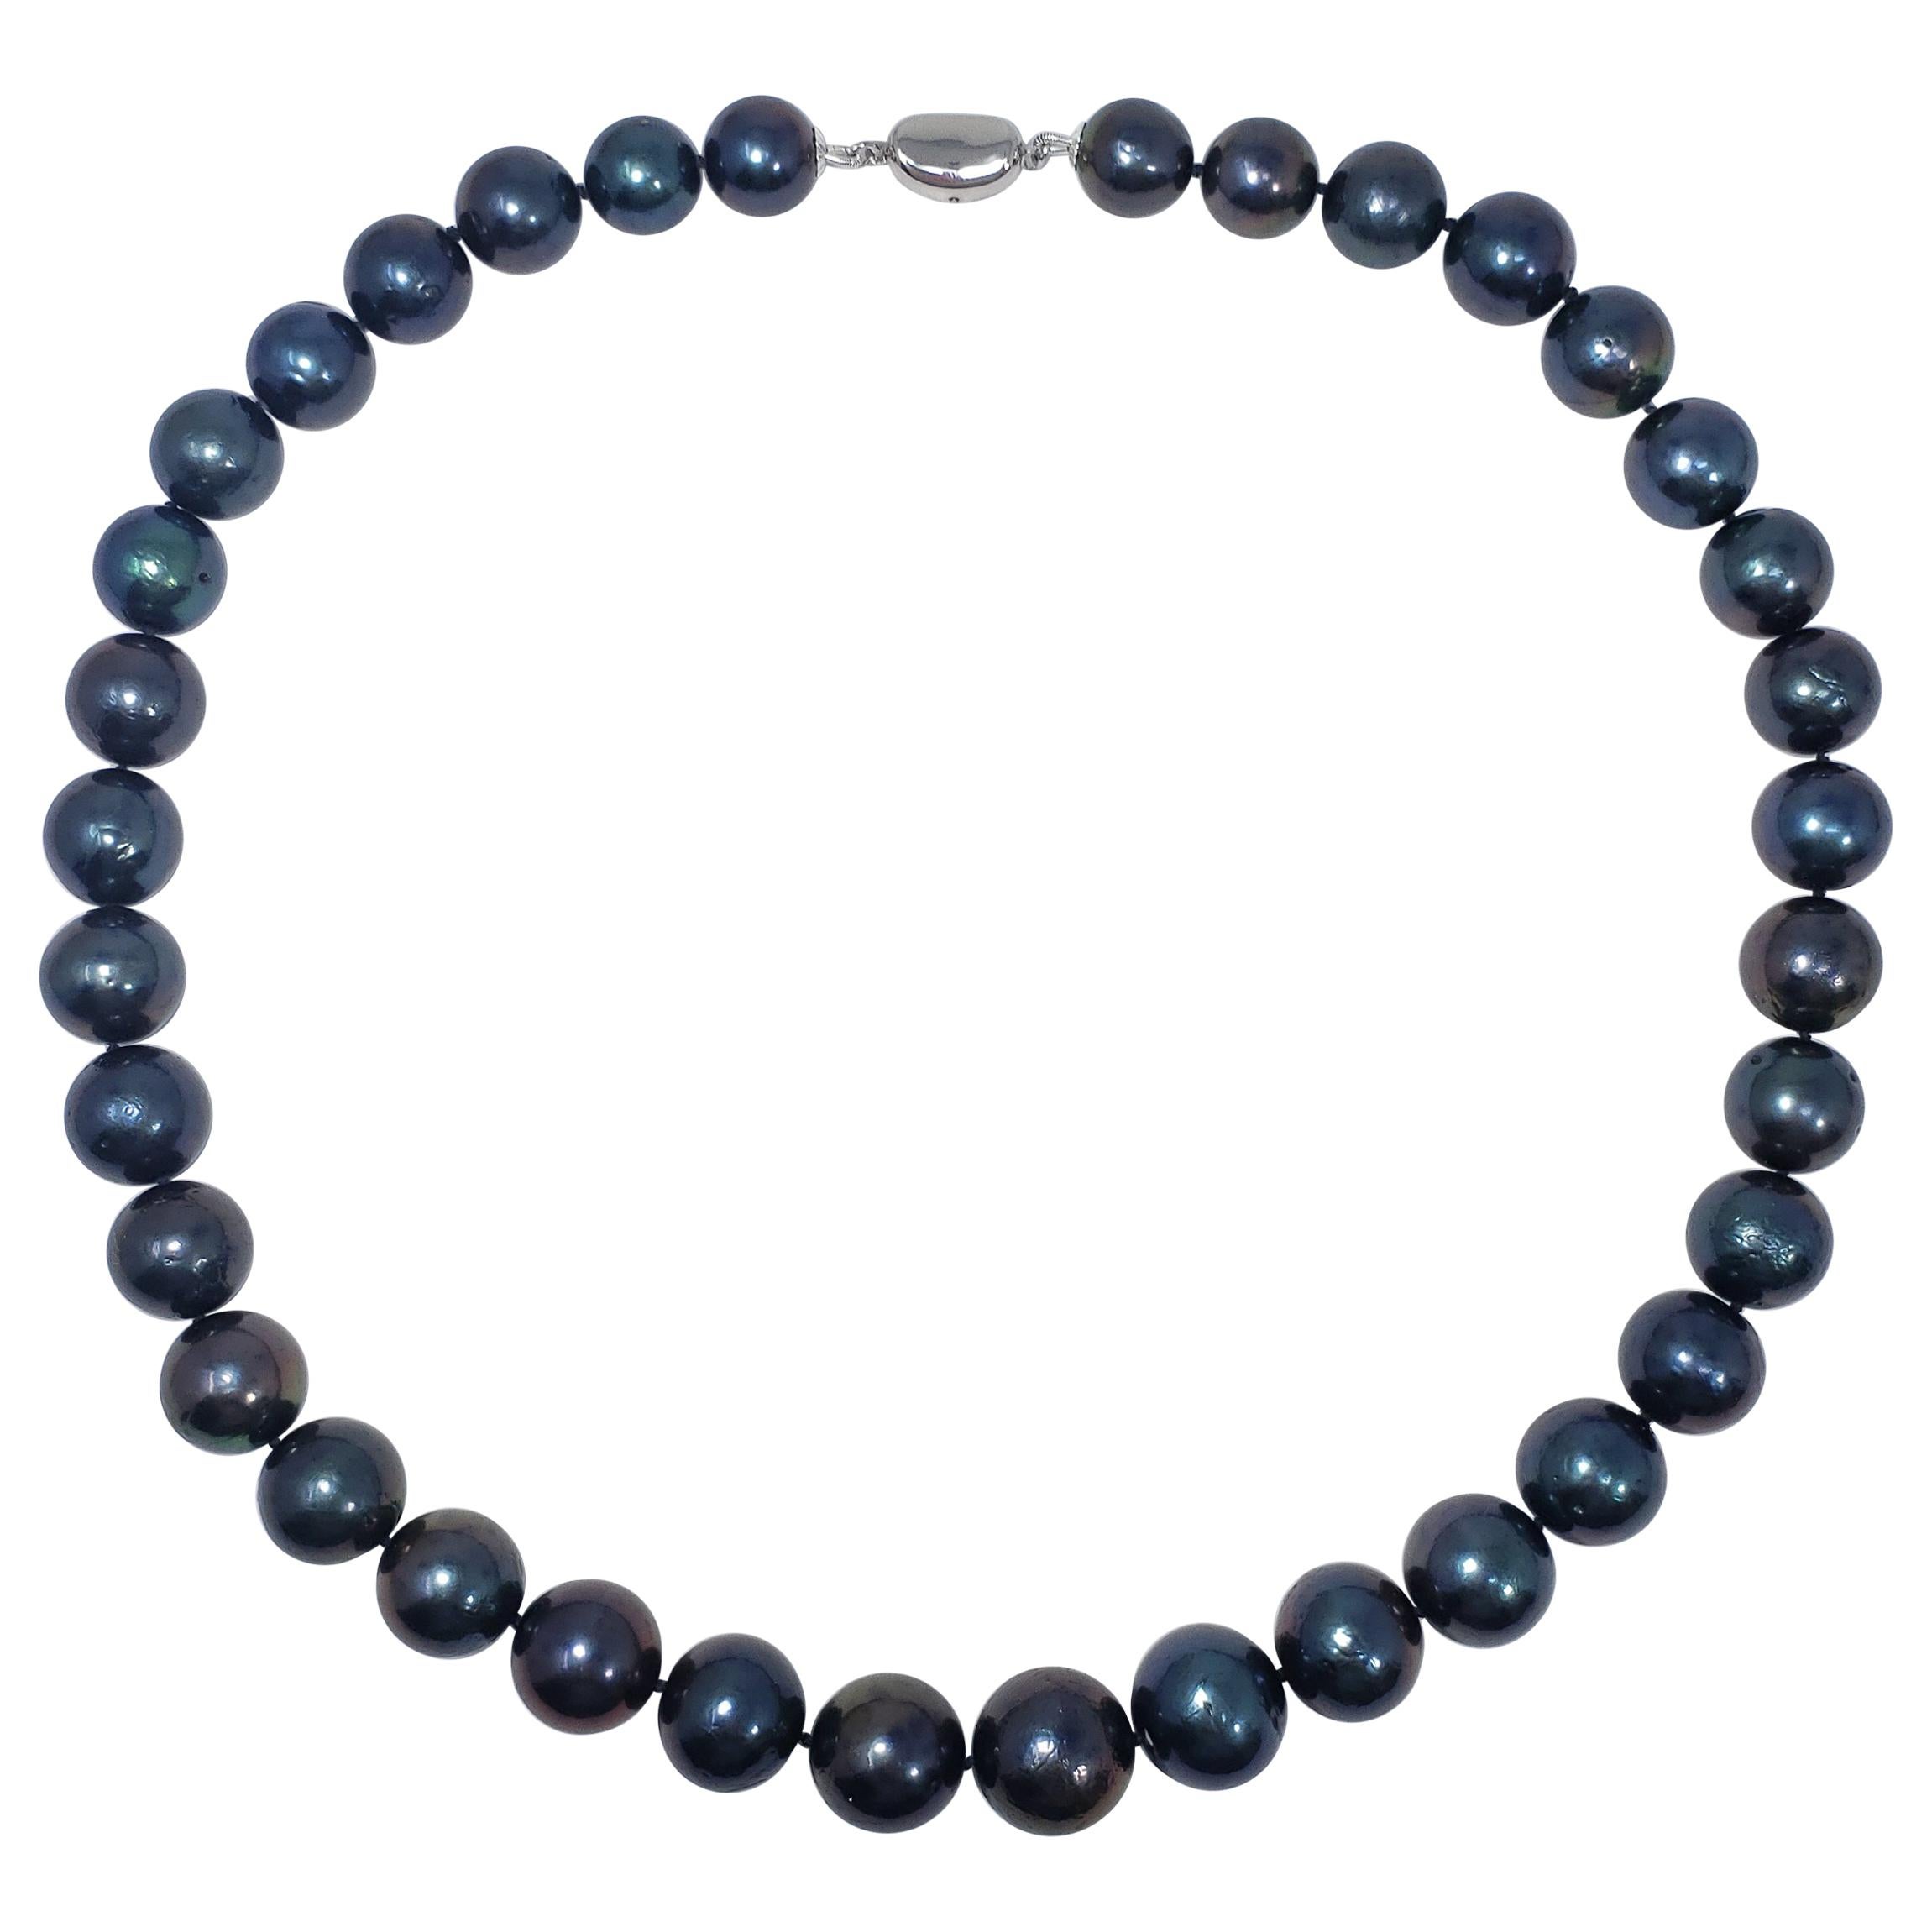 Blue-Green Tahitian Pearl Beaded Necklace with Sterling Silver Clasp, 52 cm Long